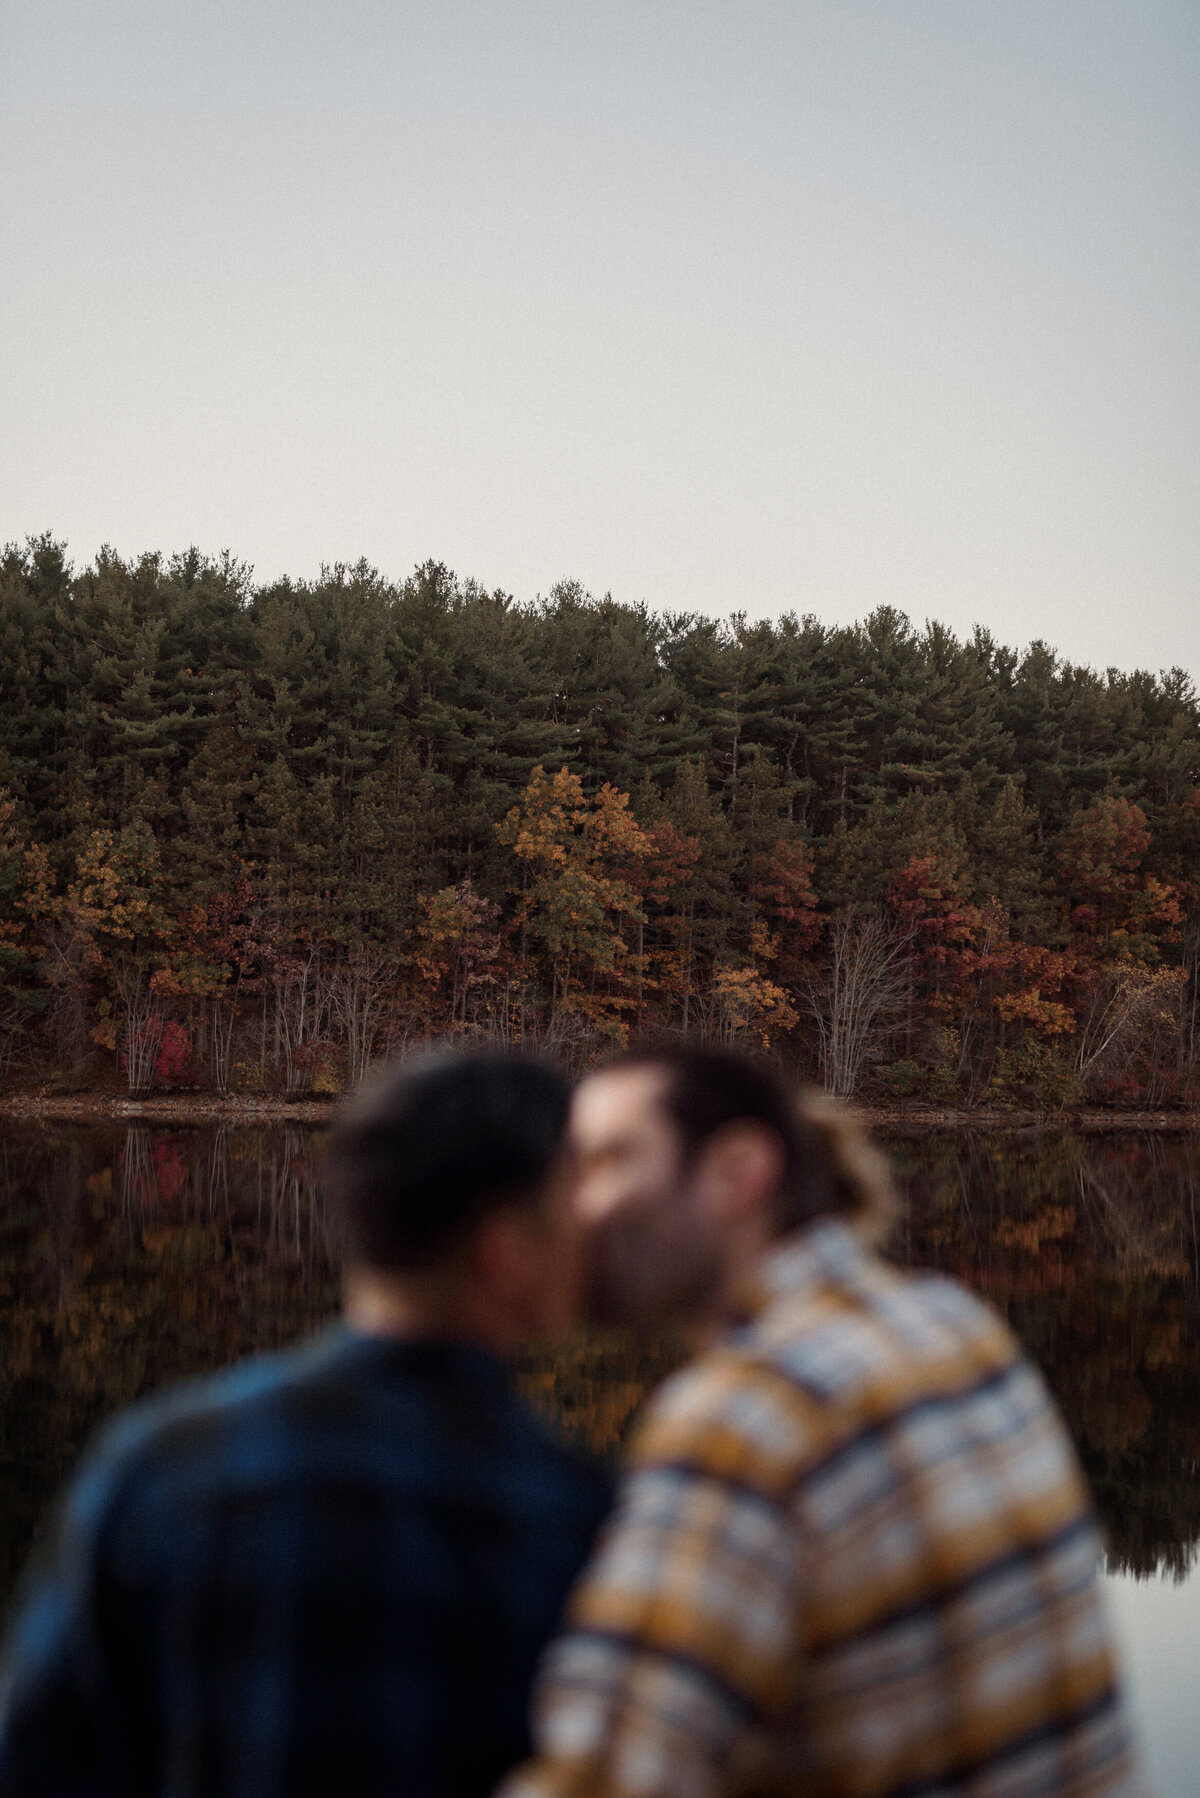 two men engagement session at a lake in the woods on a fall day. a gay couple and lgbtw friendly session. featuring a white man and asian man.